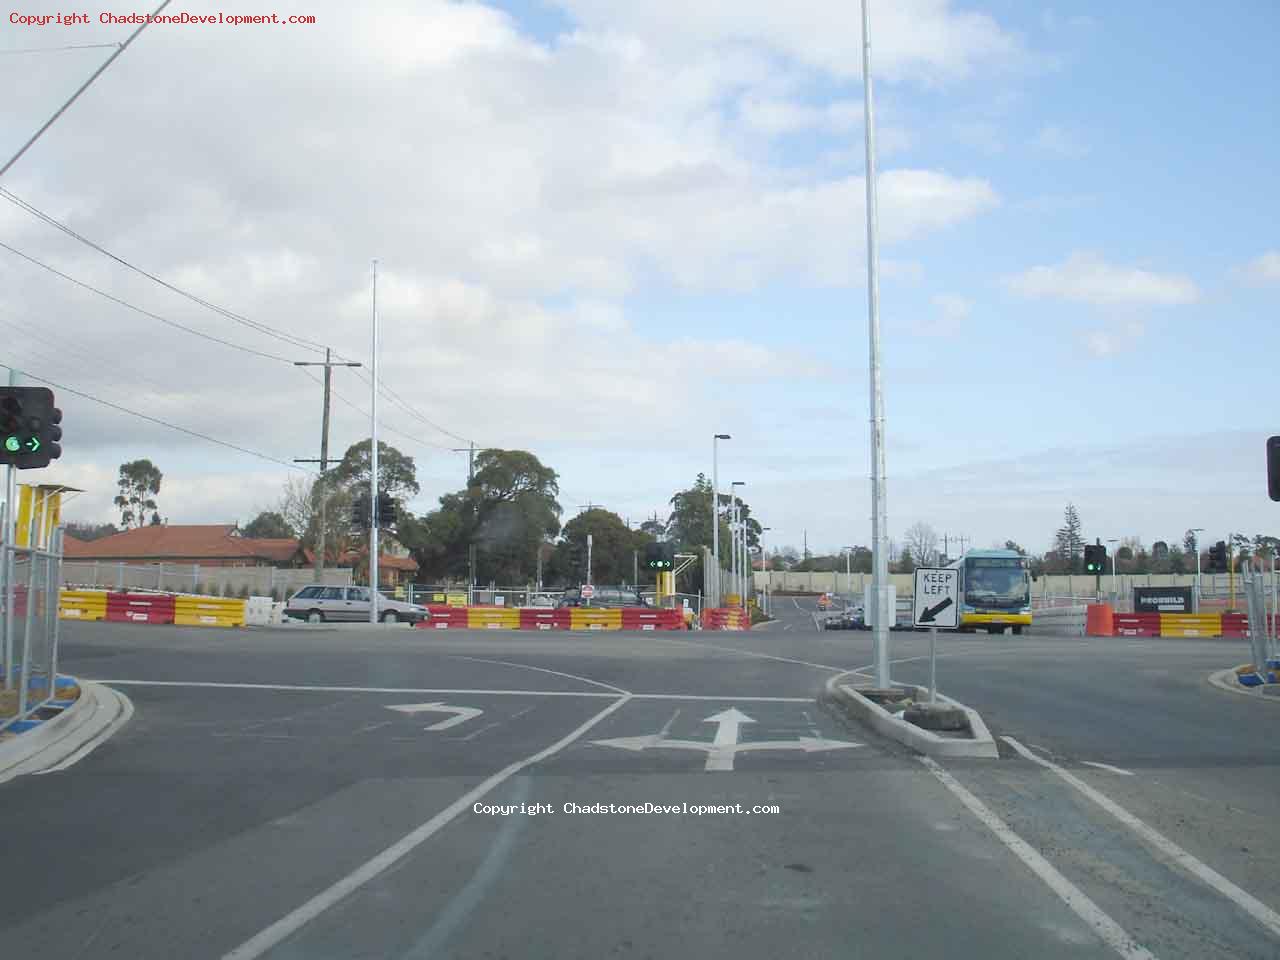 Capon St / Middle rd intersection - Chadstone Development Discussions